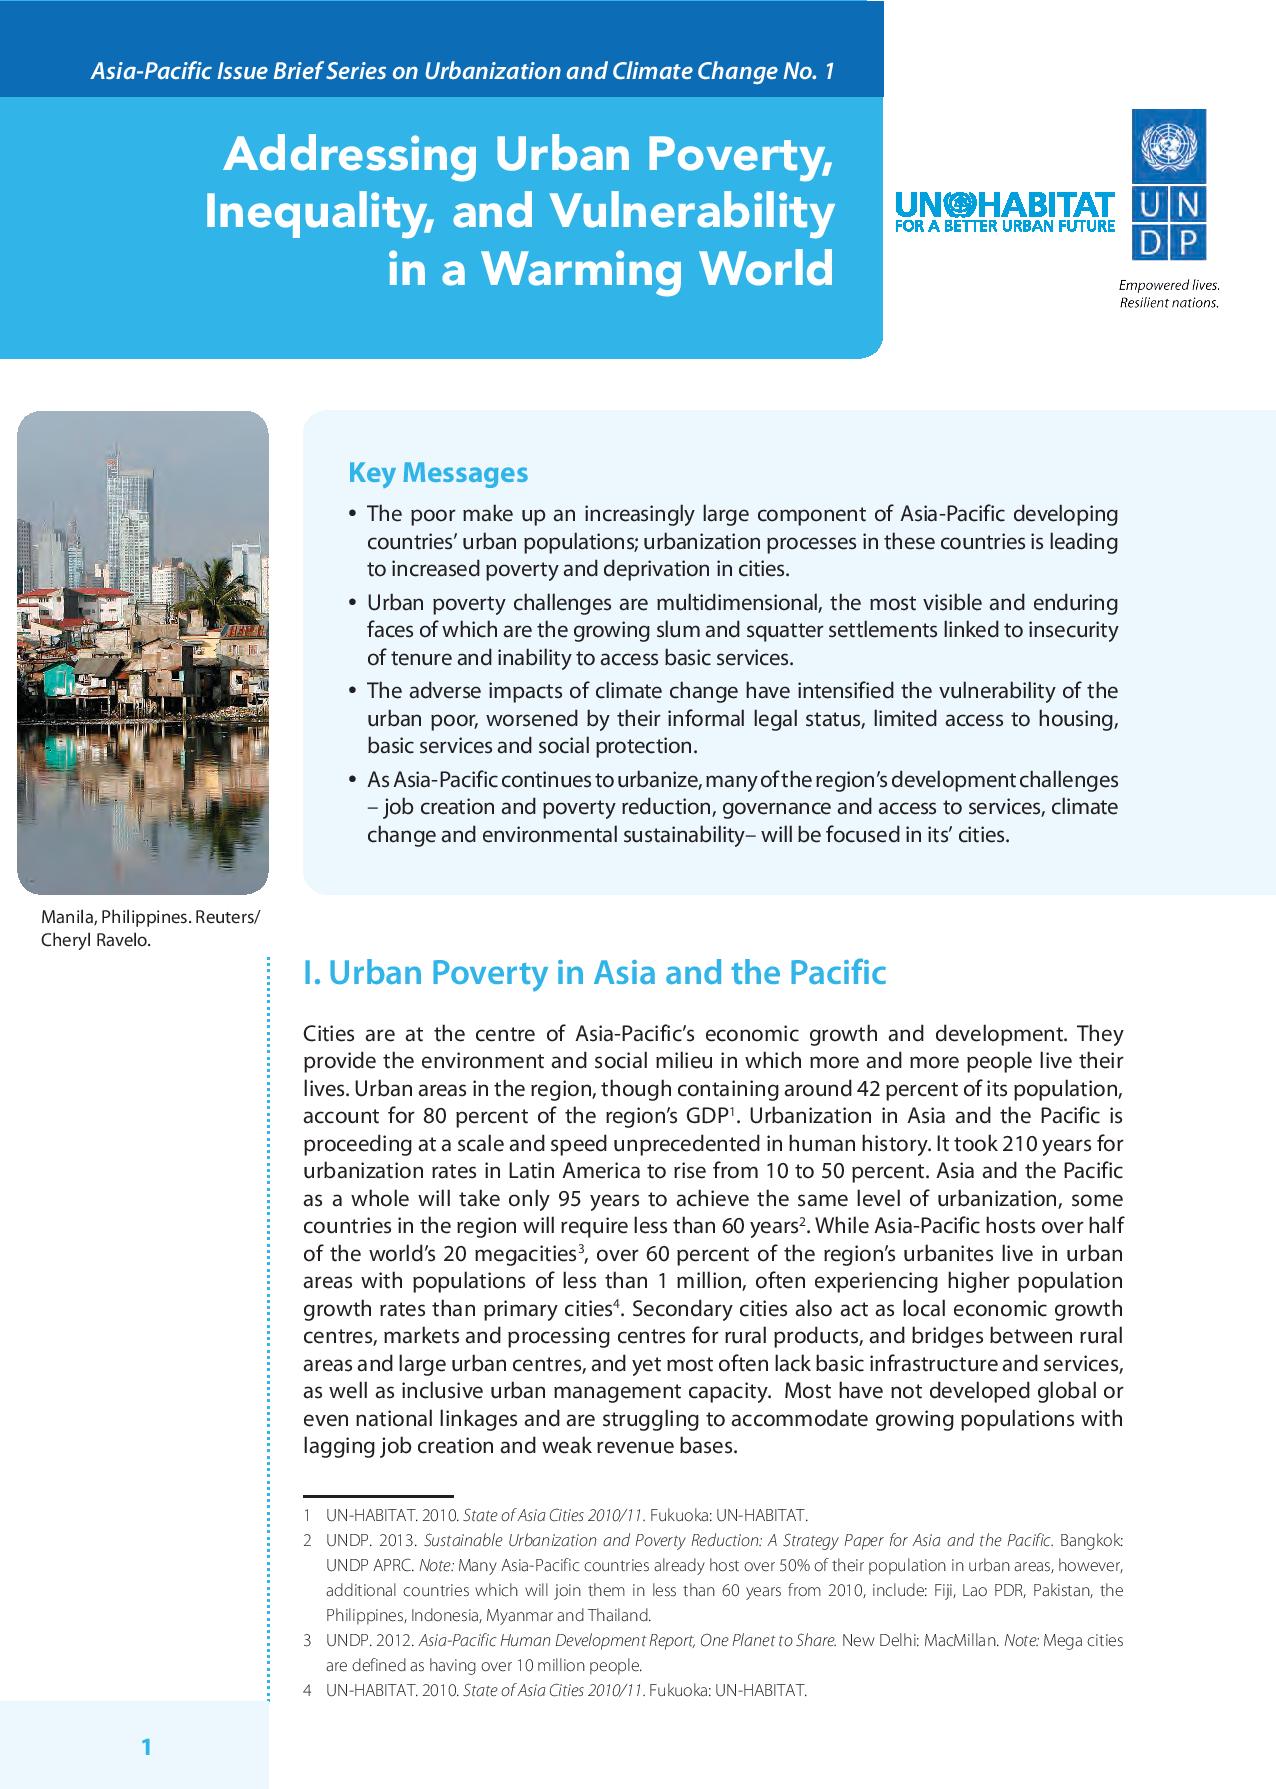 No.1: The Asia-Pacific Issue Brief Series on Urbanization and Climate Change (2013)